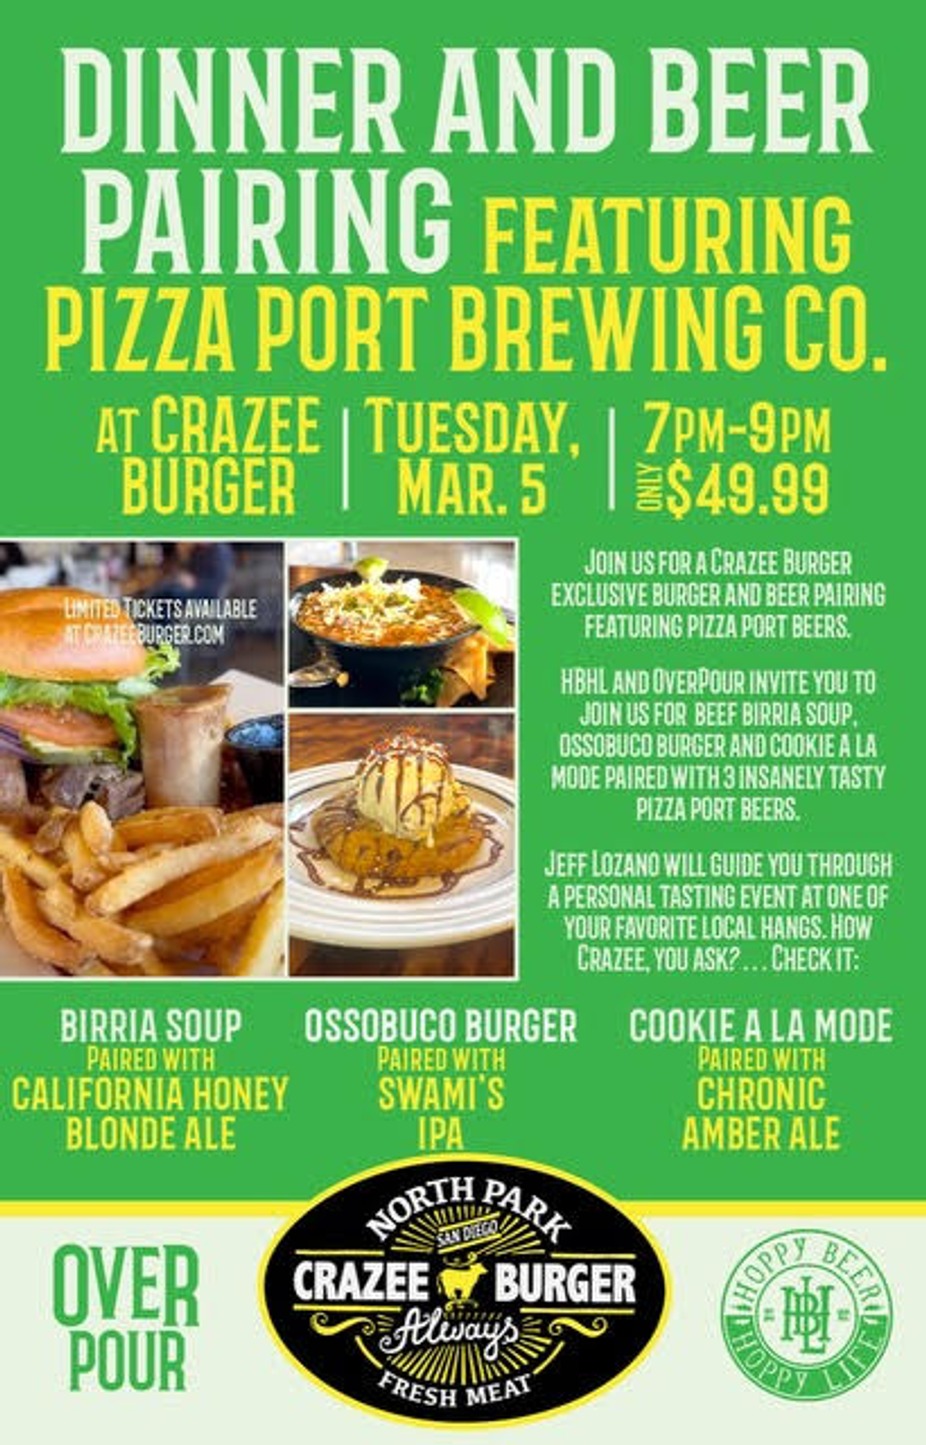 Dinner And Beer Pairing  Featuring Pizza Port Brewing Co. event photo